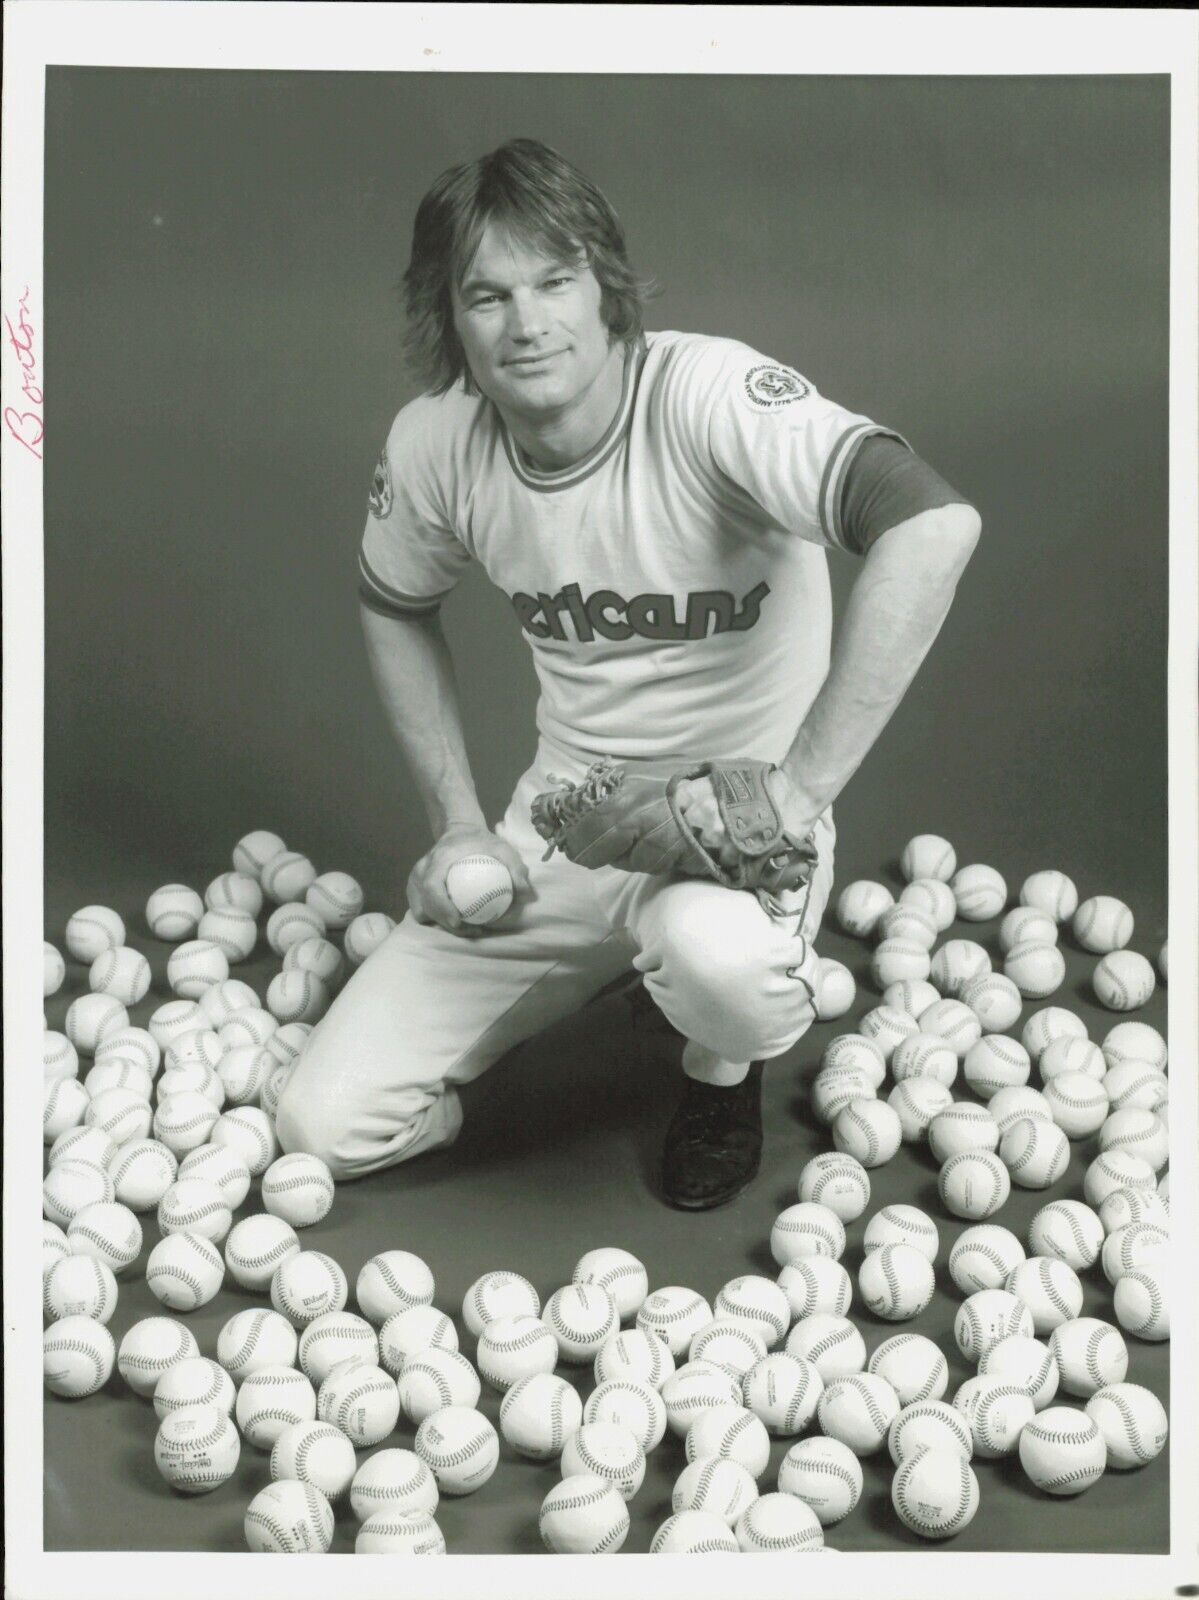 1976 Press Photo Promotional Image Jim Bouton for TV Show Ball Four